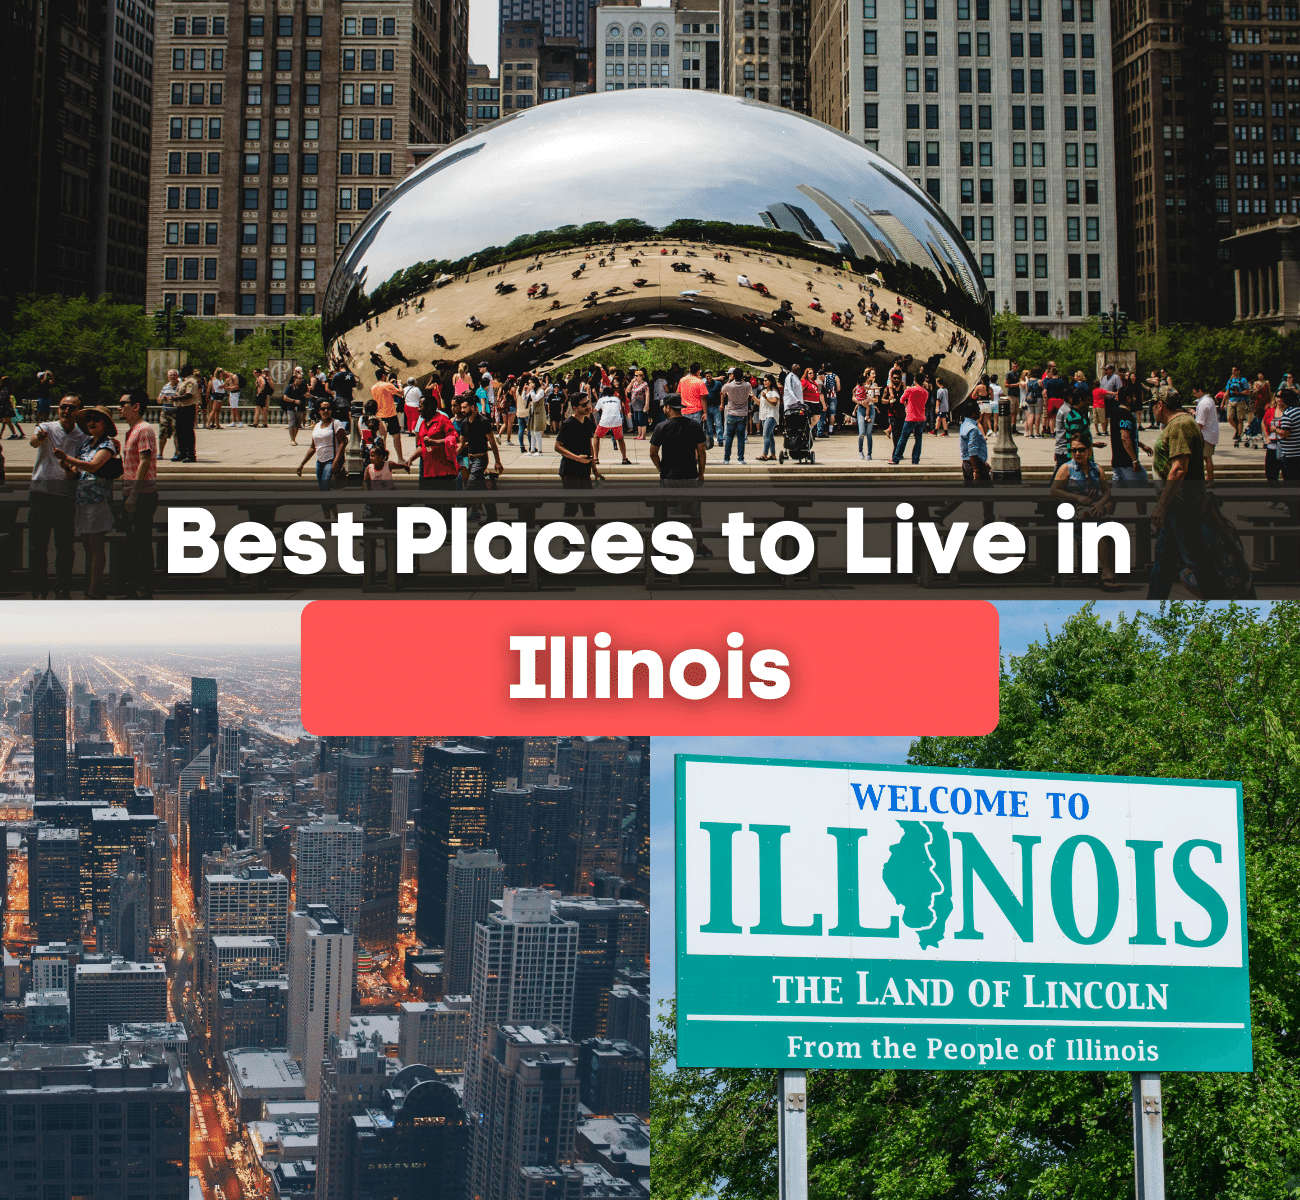 Best cities to live in Illinois - Where are the best places to live in Illinois?